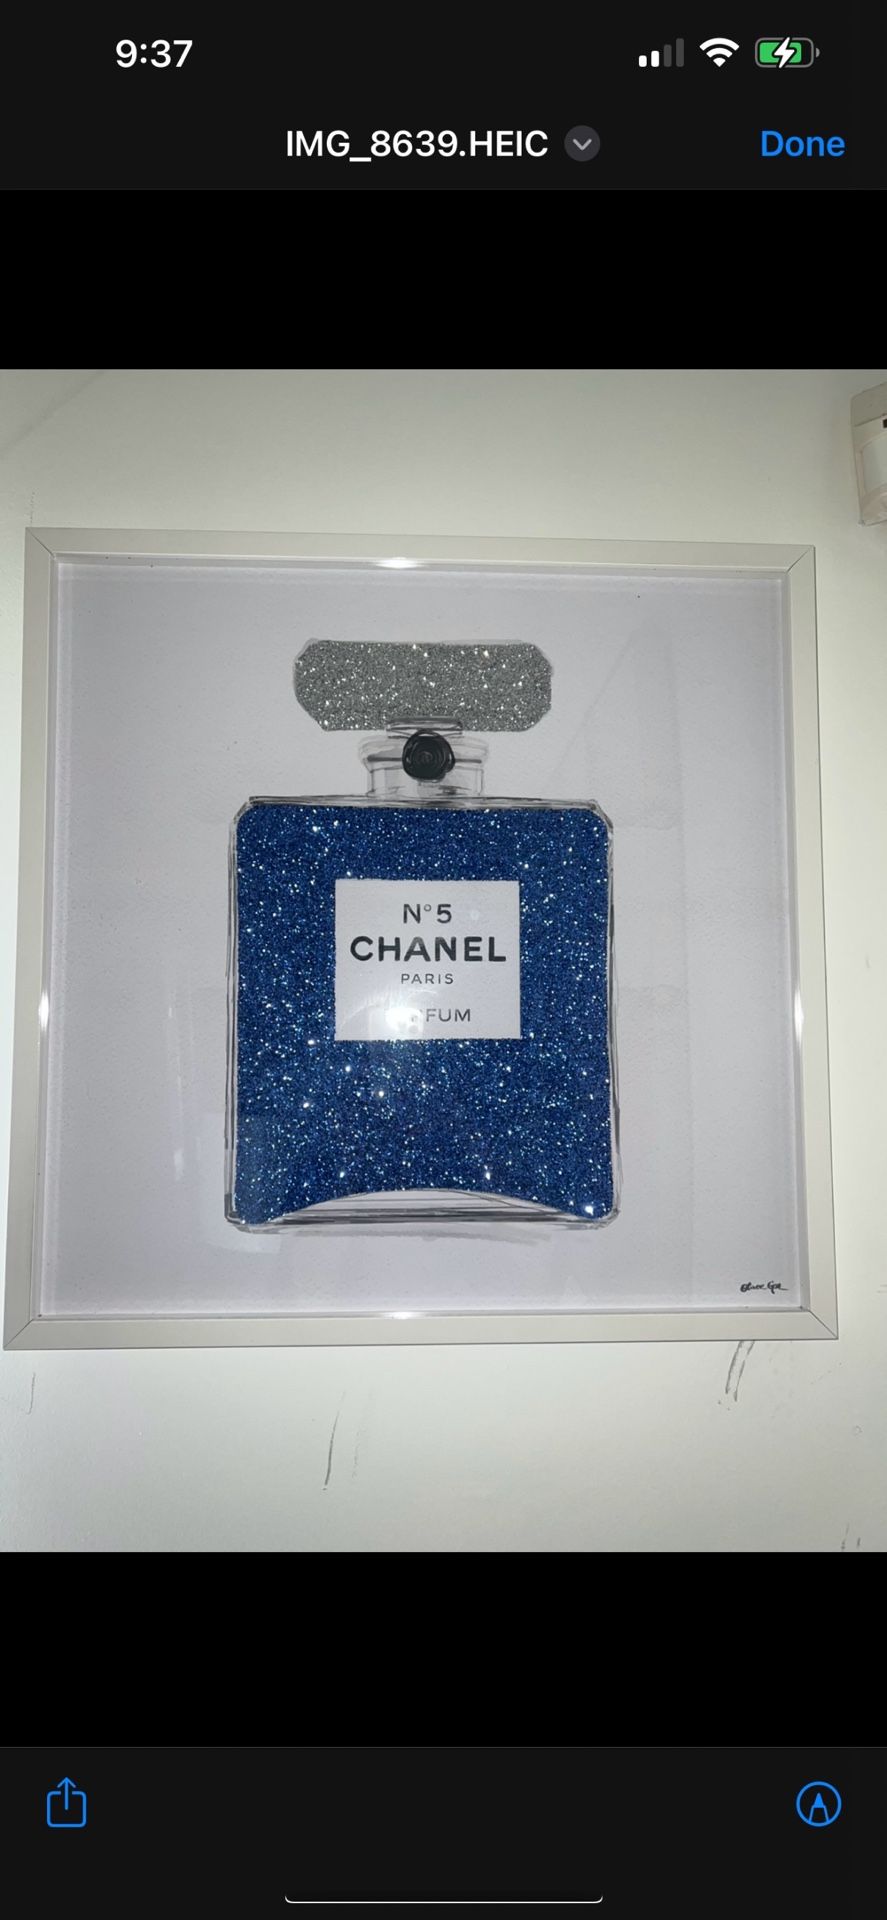 Chanel Perfume Bottle Picture z Gallery